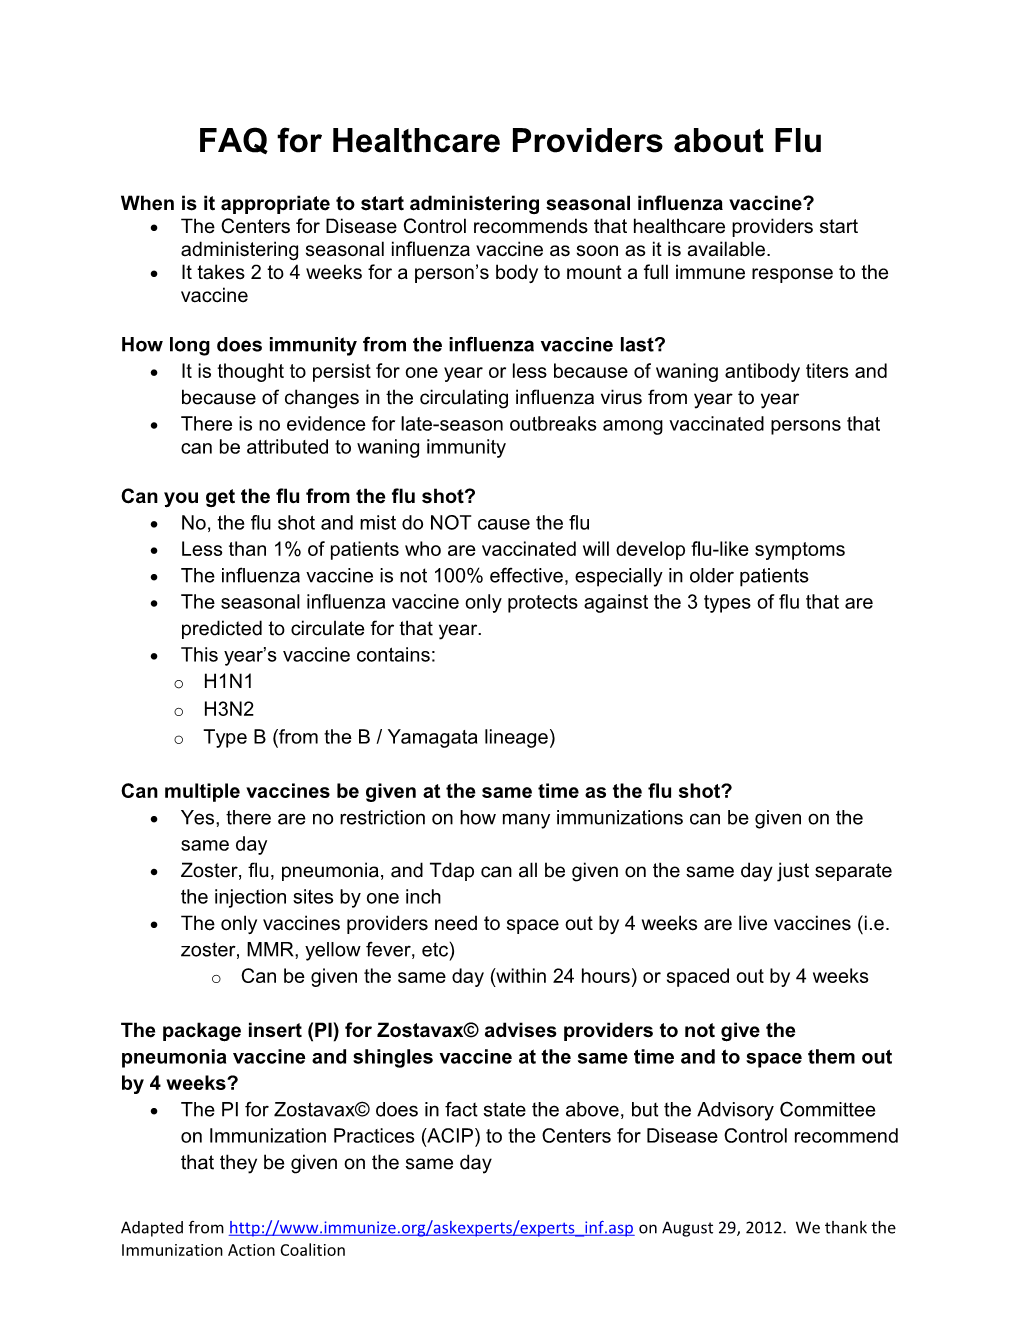 FAQ for Healthcare Providers About Flu